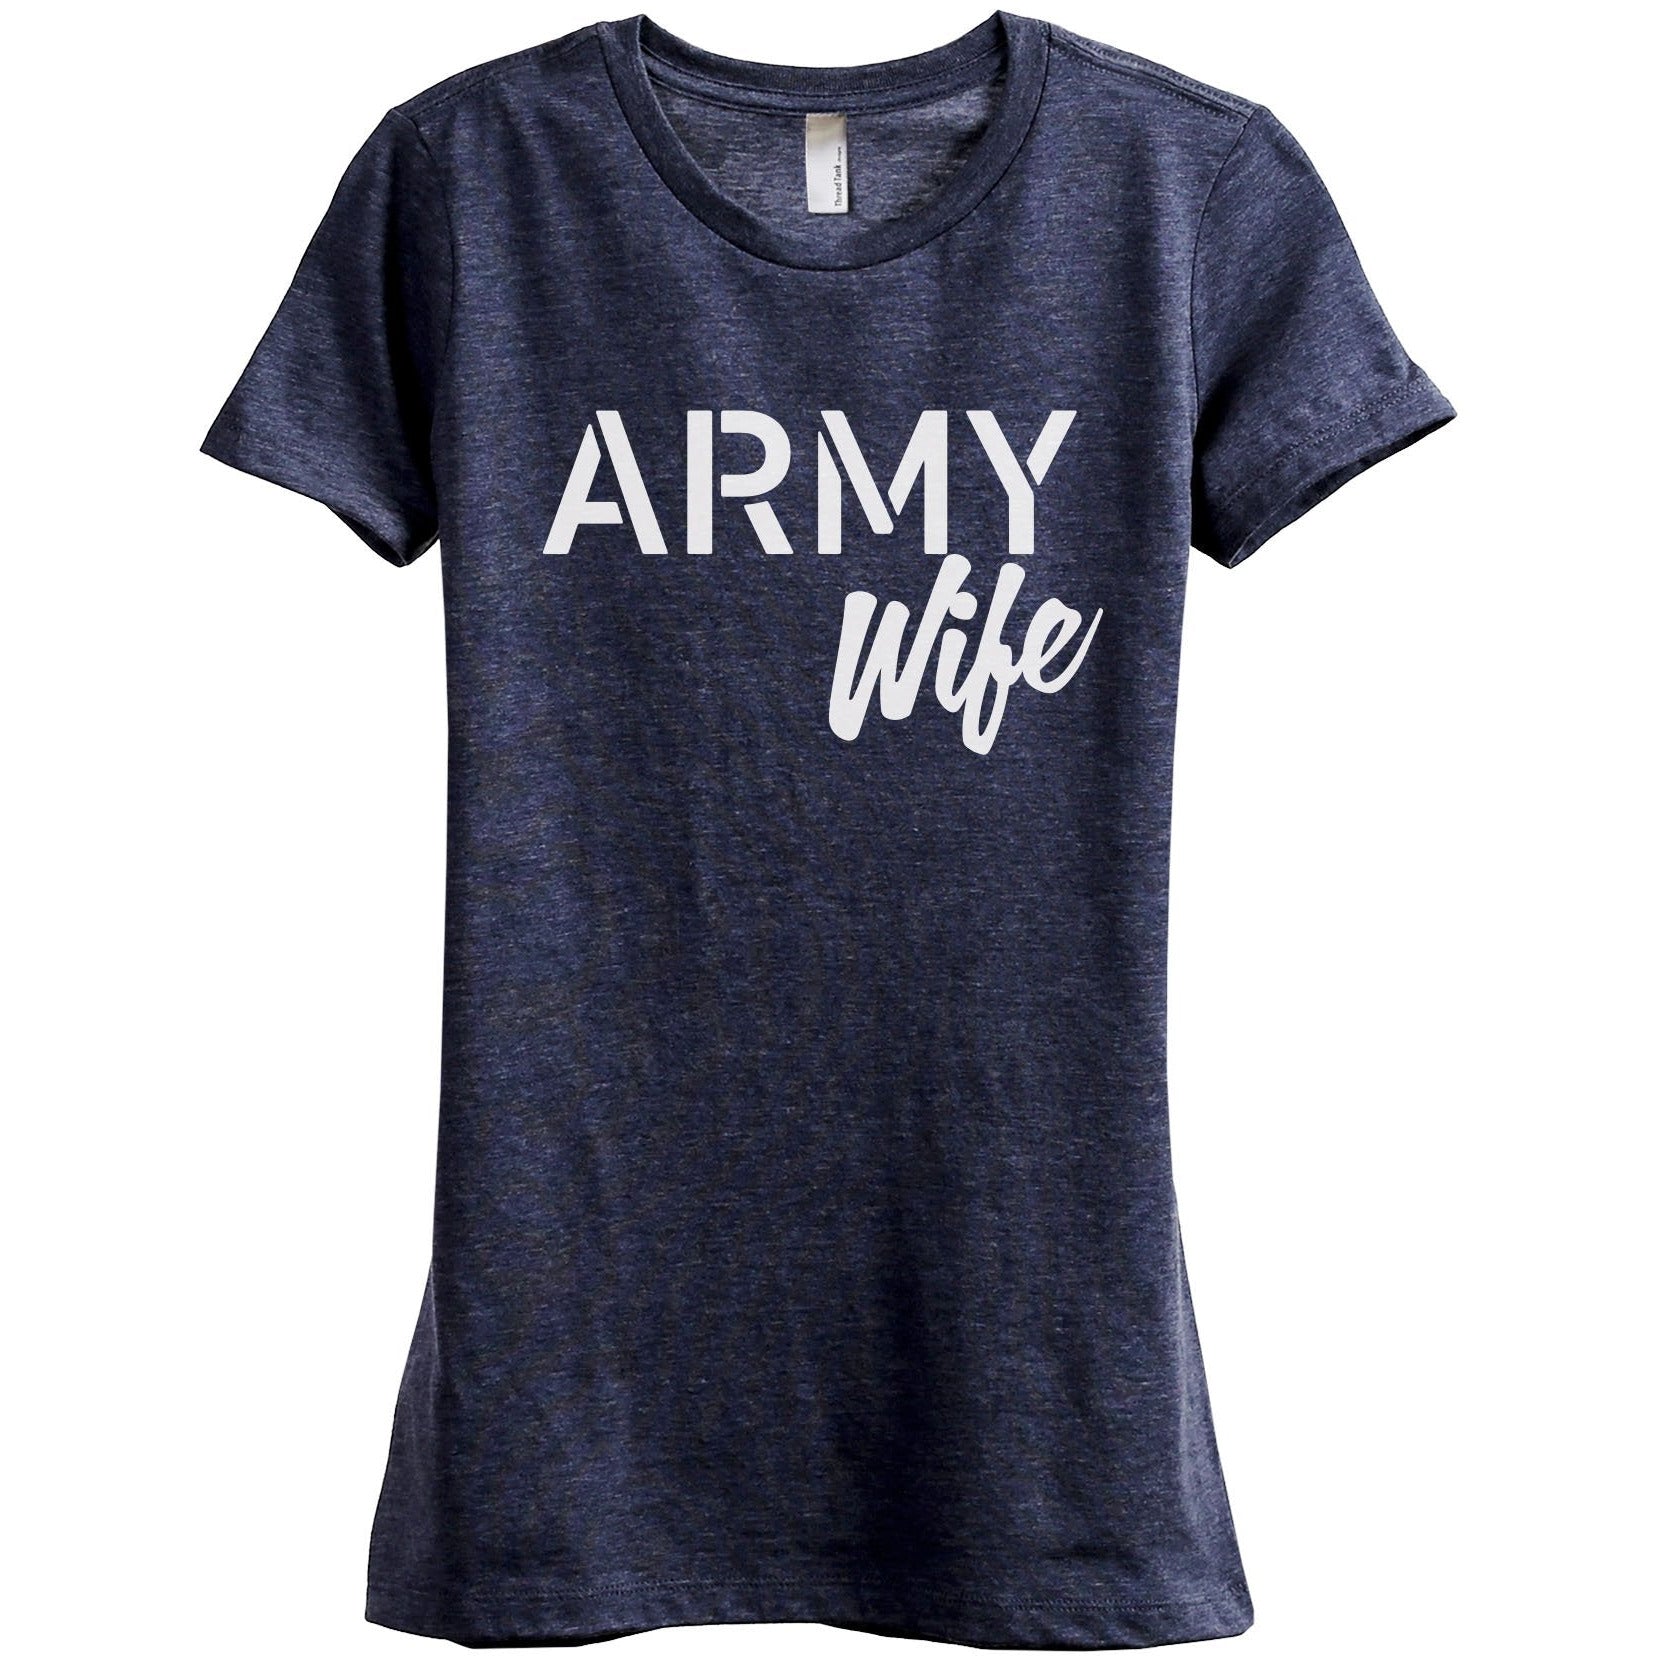 Army Wife - Stories You Can Wear